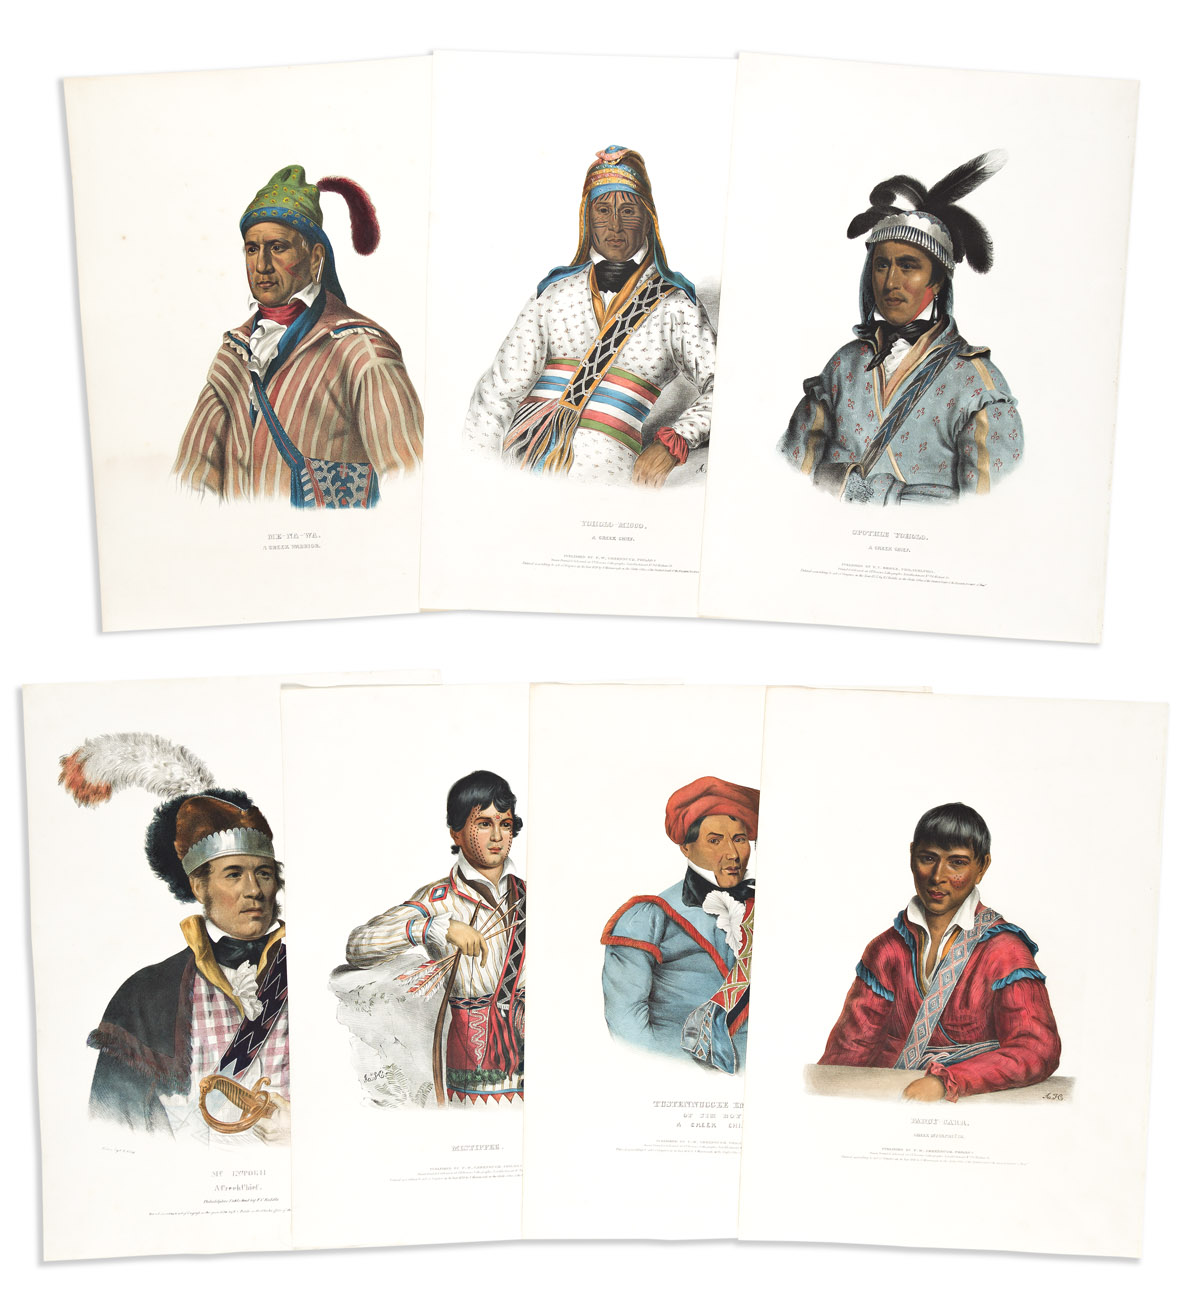 (NATIVE AMERICANS.) Thomas McKenney; and James Hall. Group of 7 hand-colored lithographed plates of Creek tribesmen from